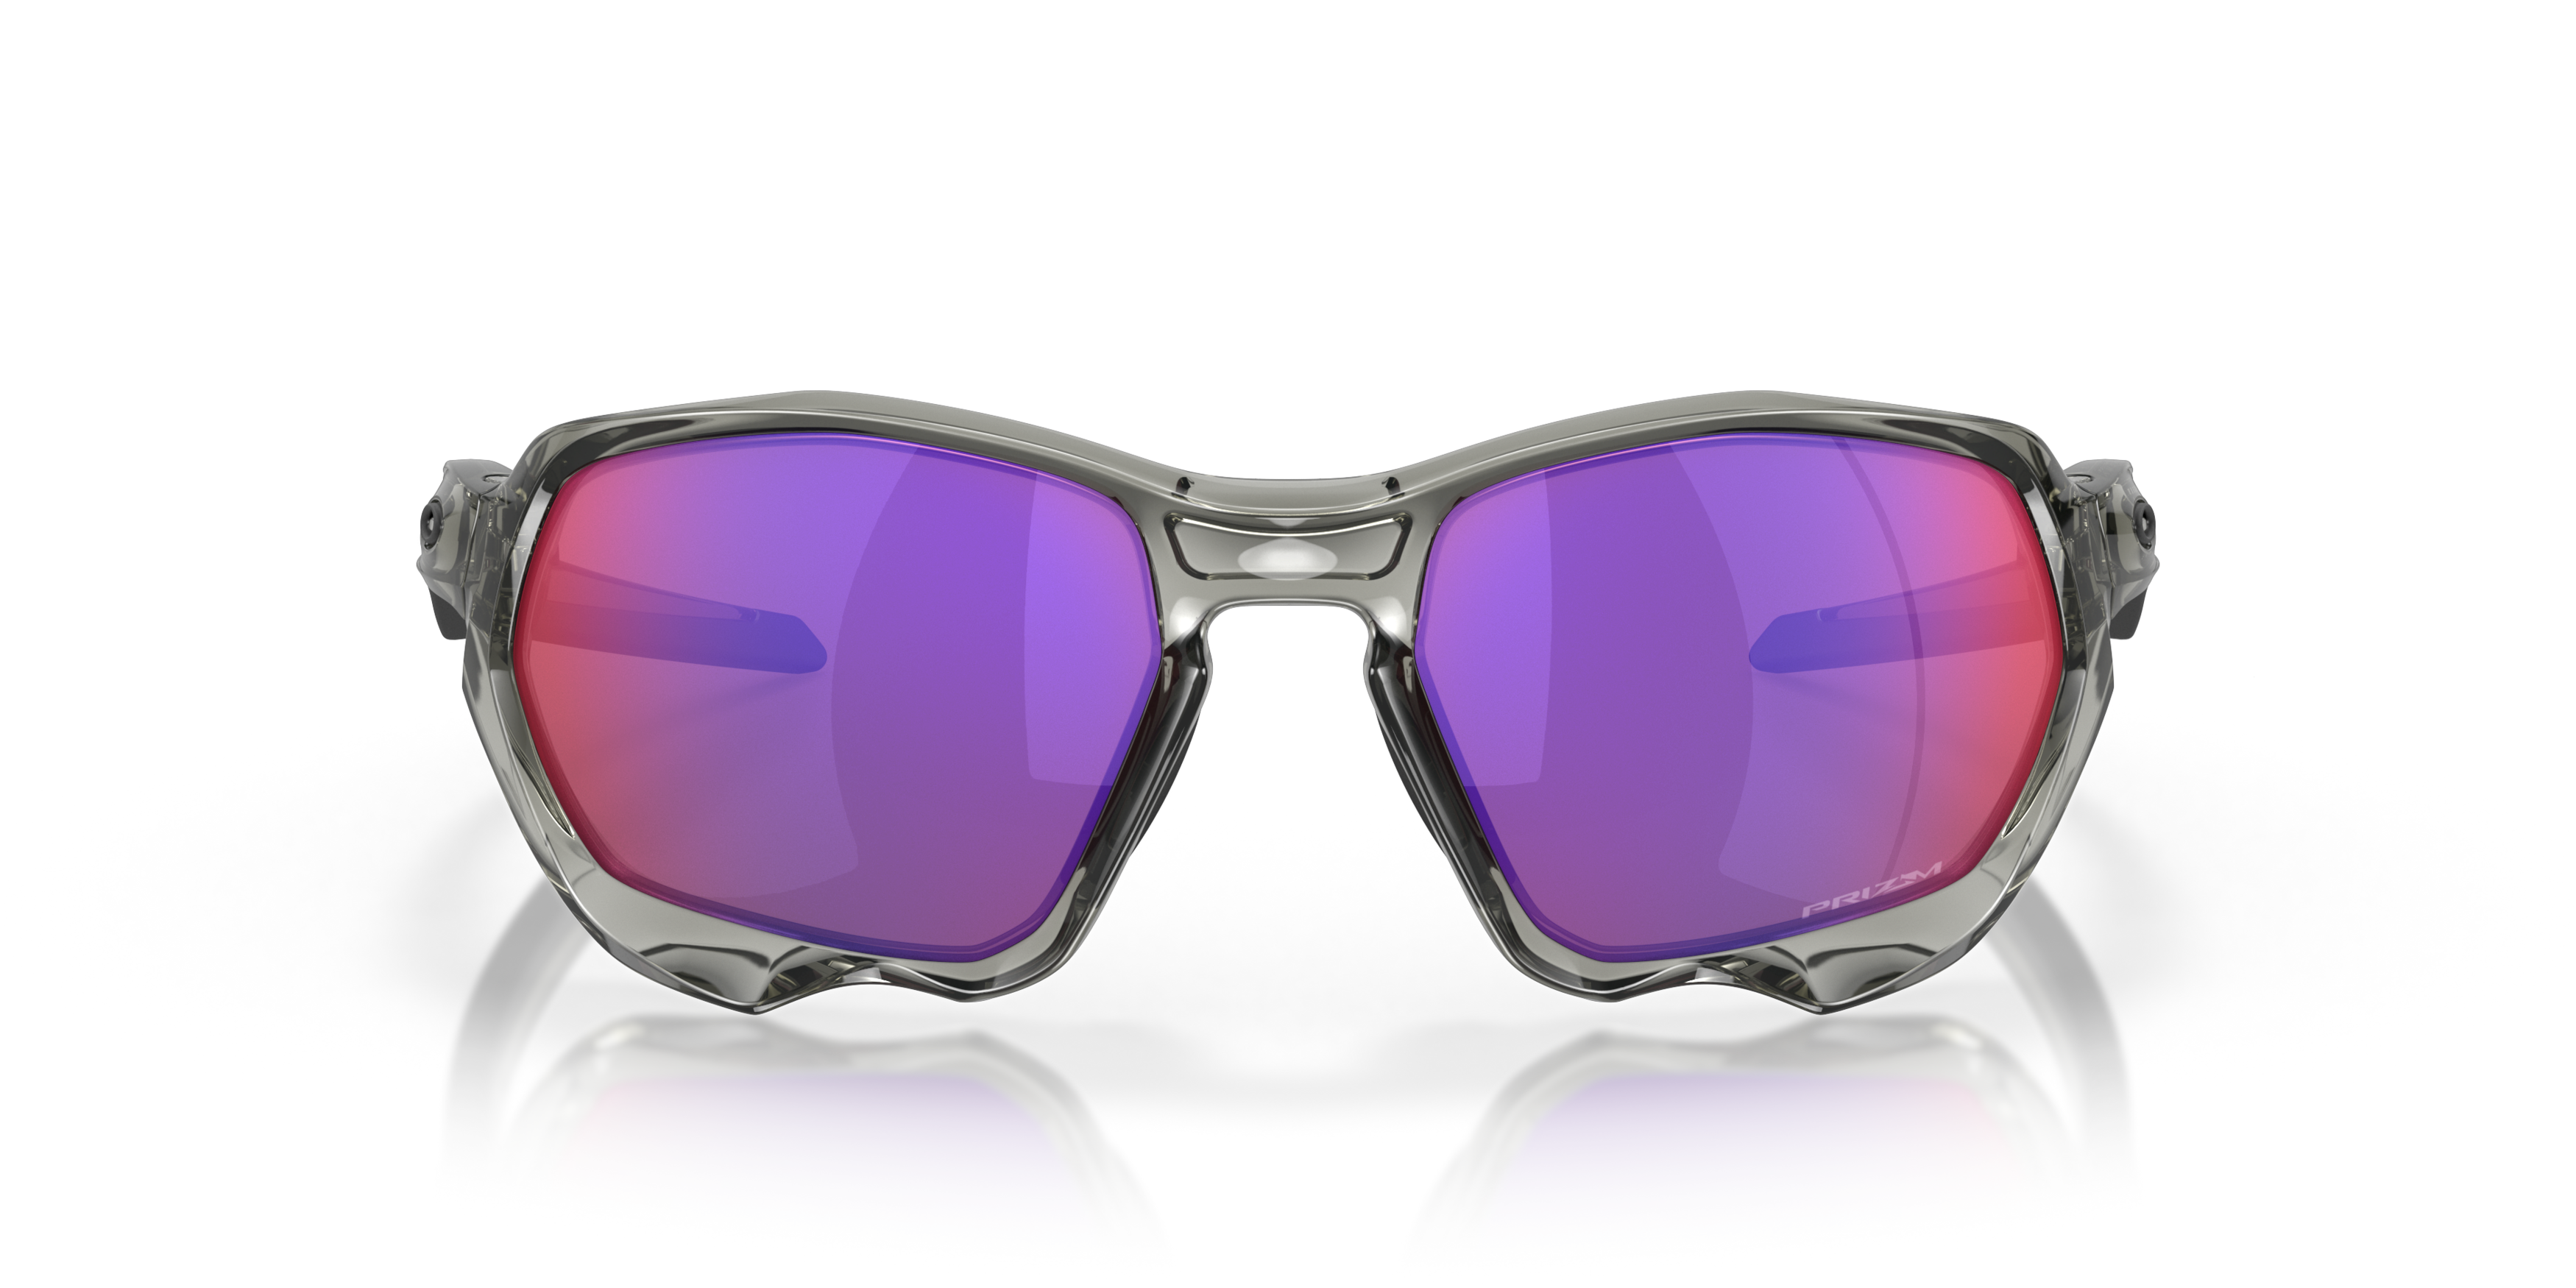 [products.image.front] Oakley 0OO9019 901903